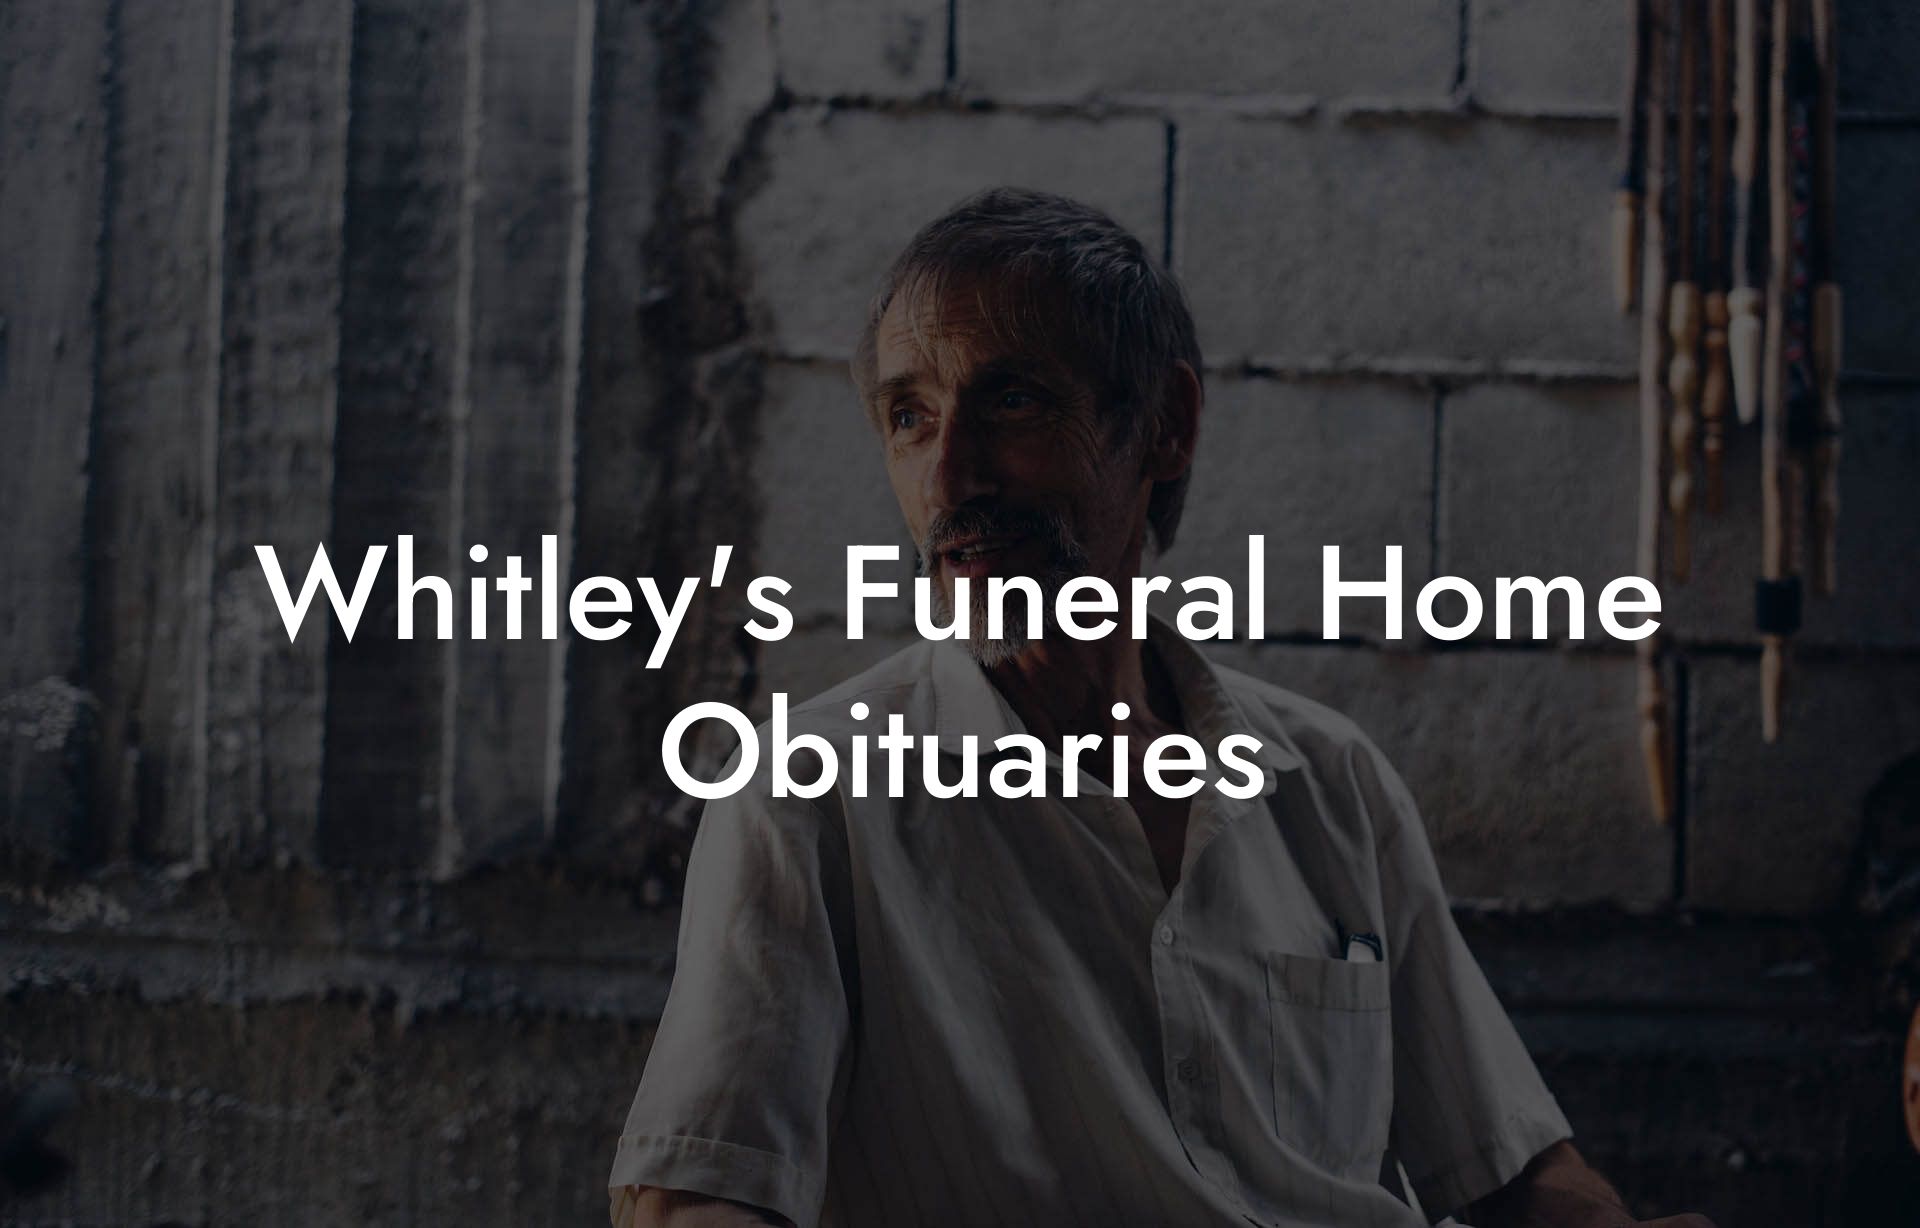 Whitley's Funeral Home Obituaries